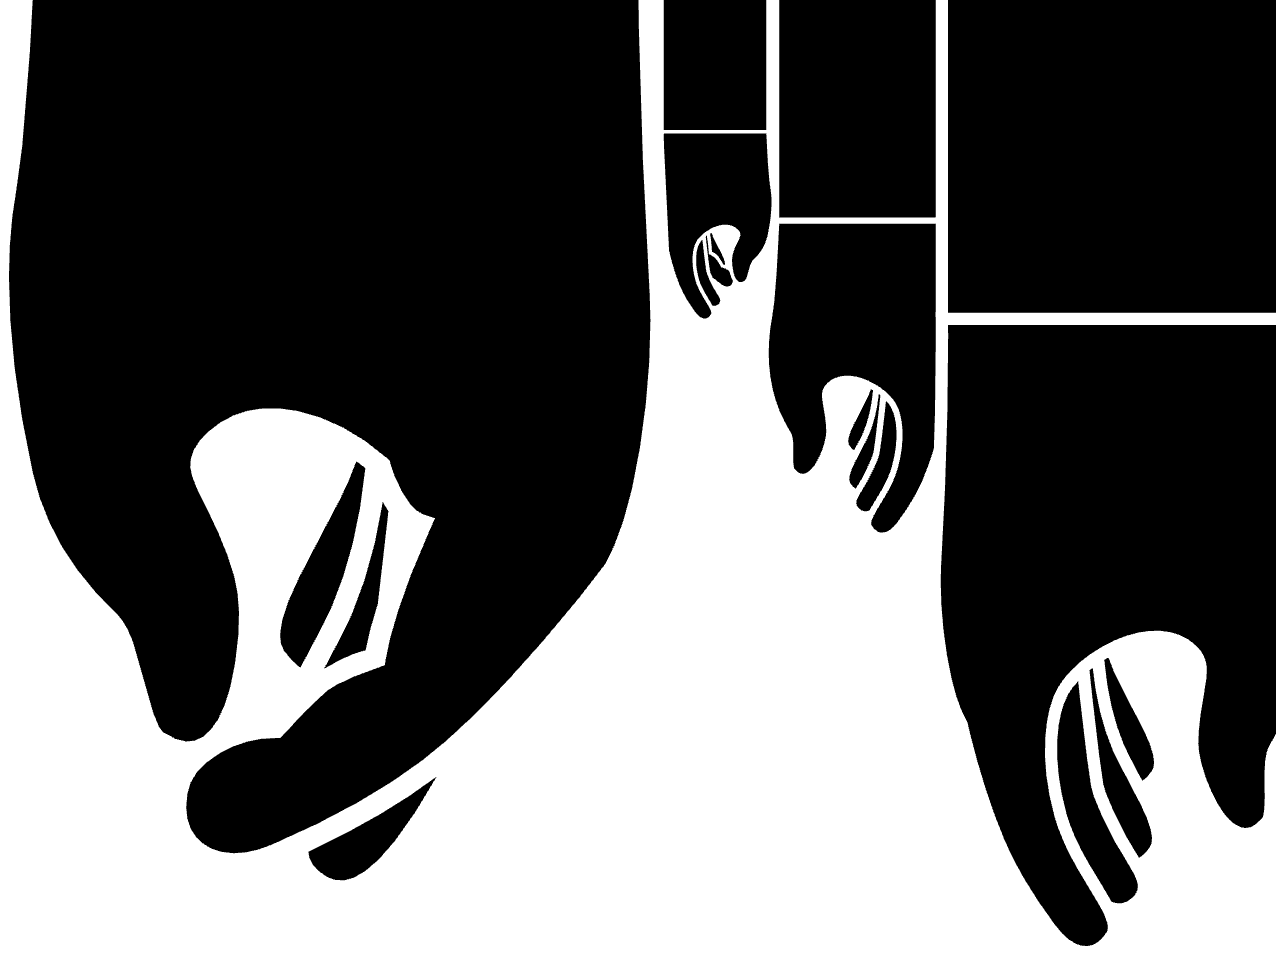 Four black silhouettes of hands of various sizes reach down from the top of the screen in a clasping motion.